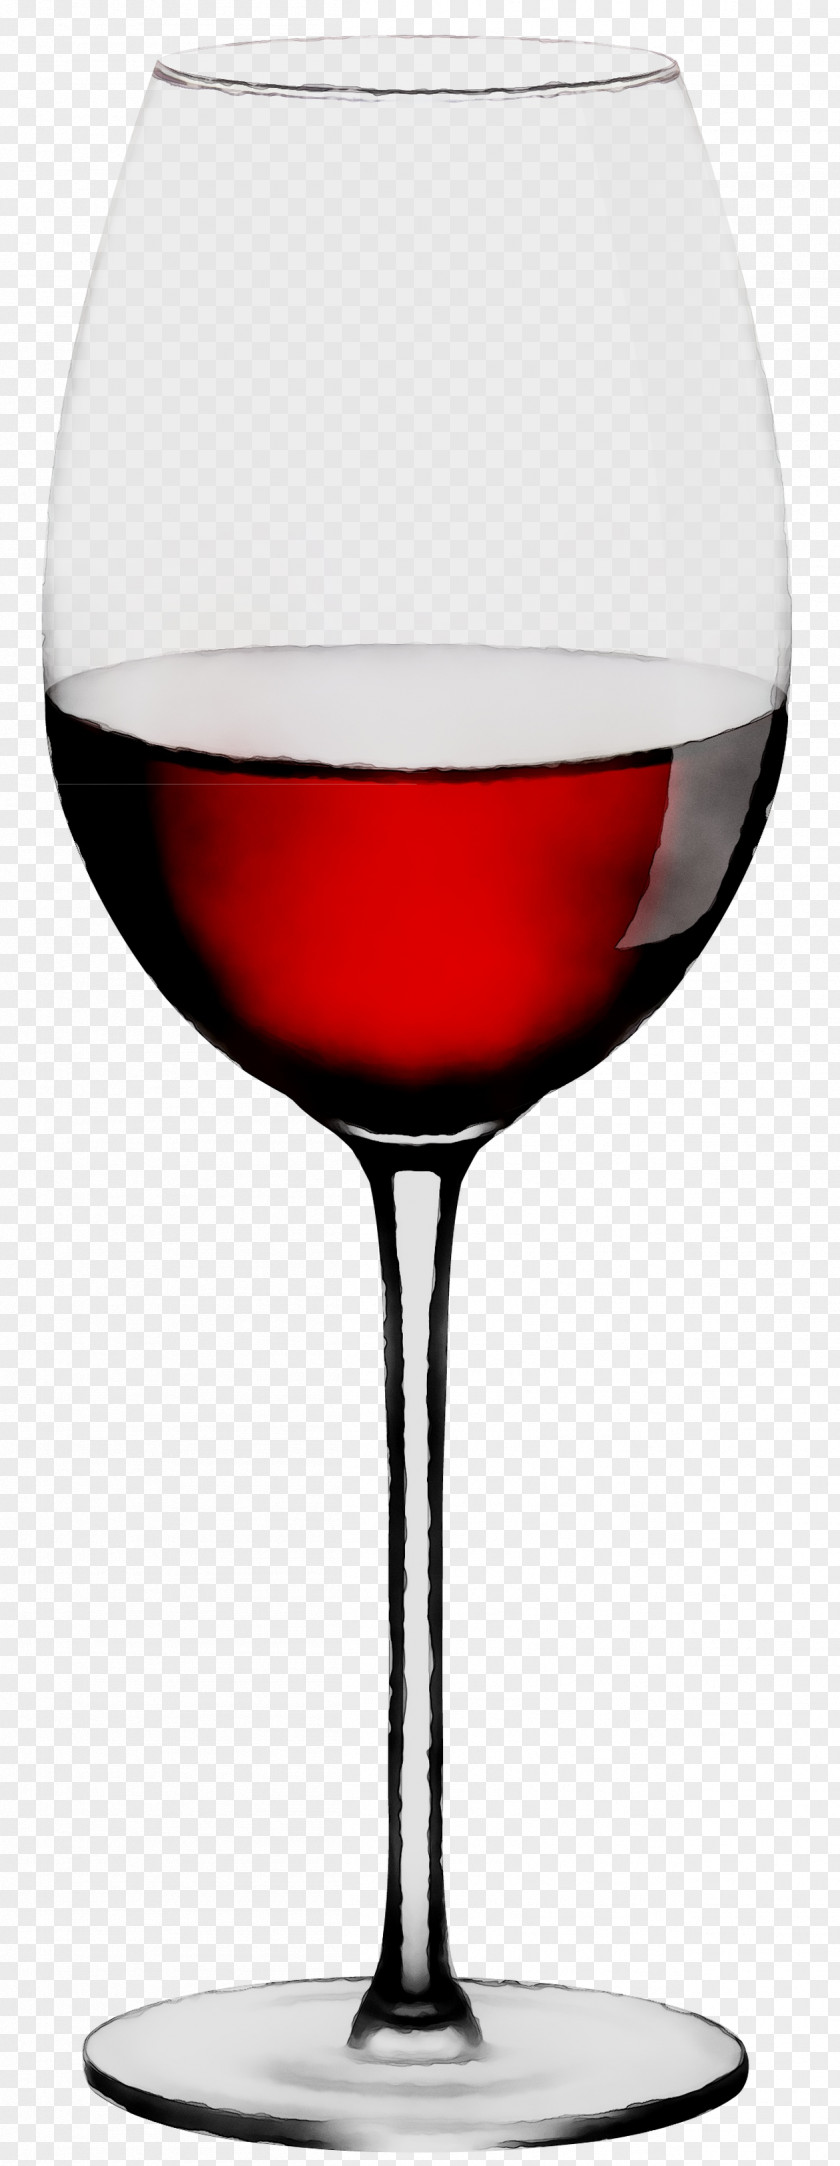 Wine Glass Red White Mulled PNG